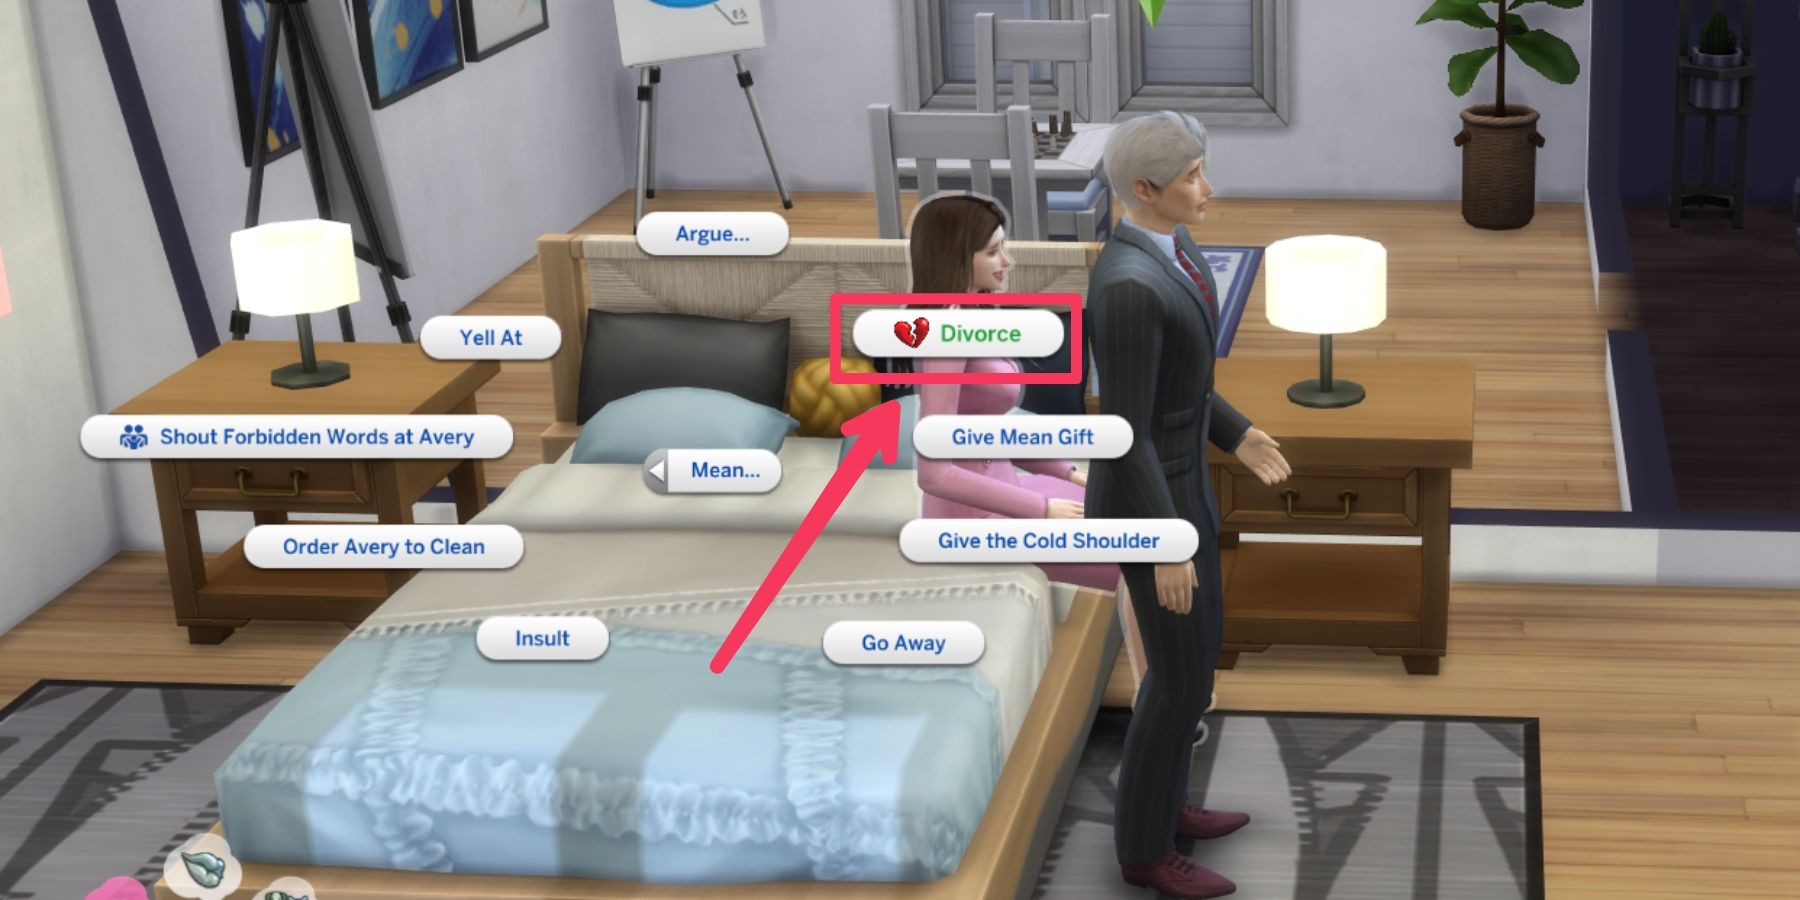 divorce option in the mean interactions in the sims 4